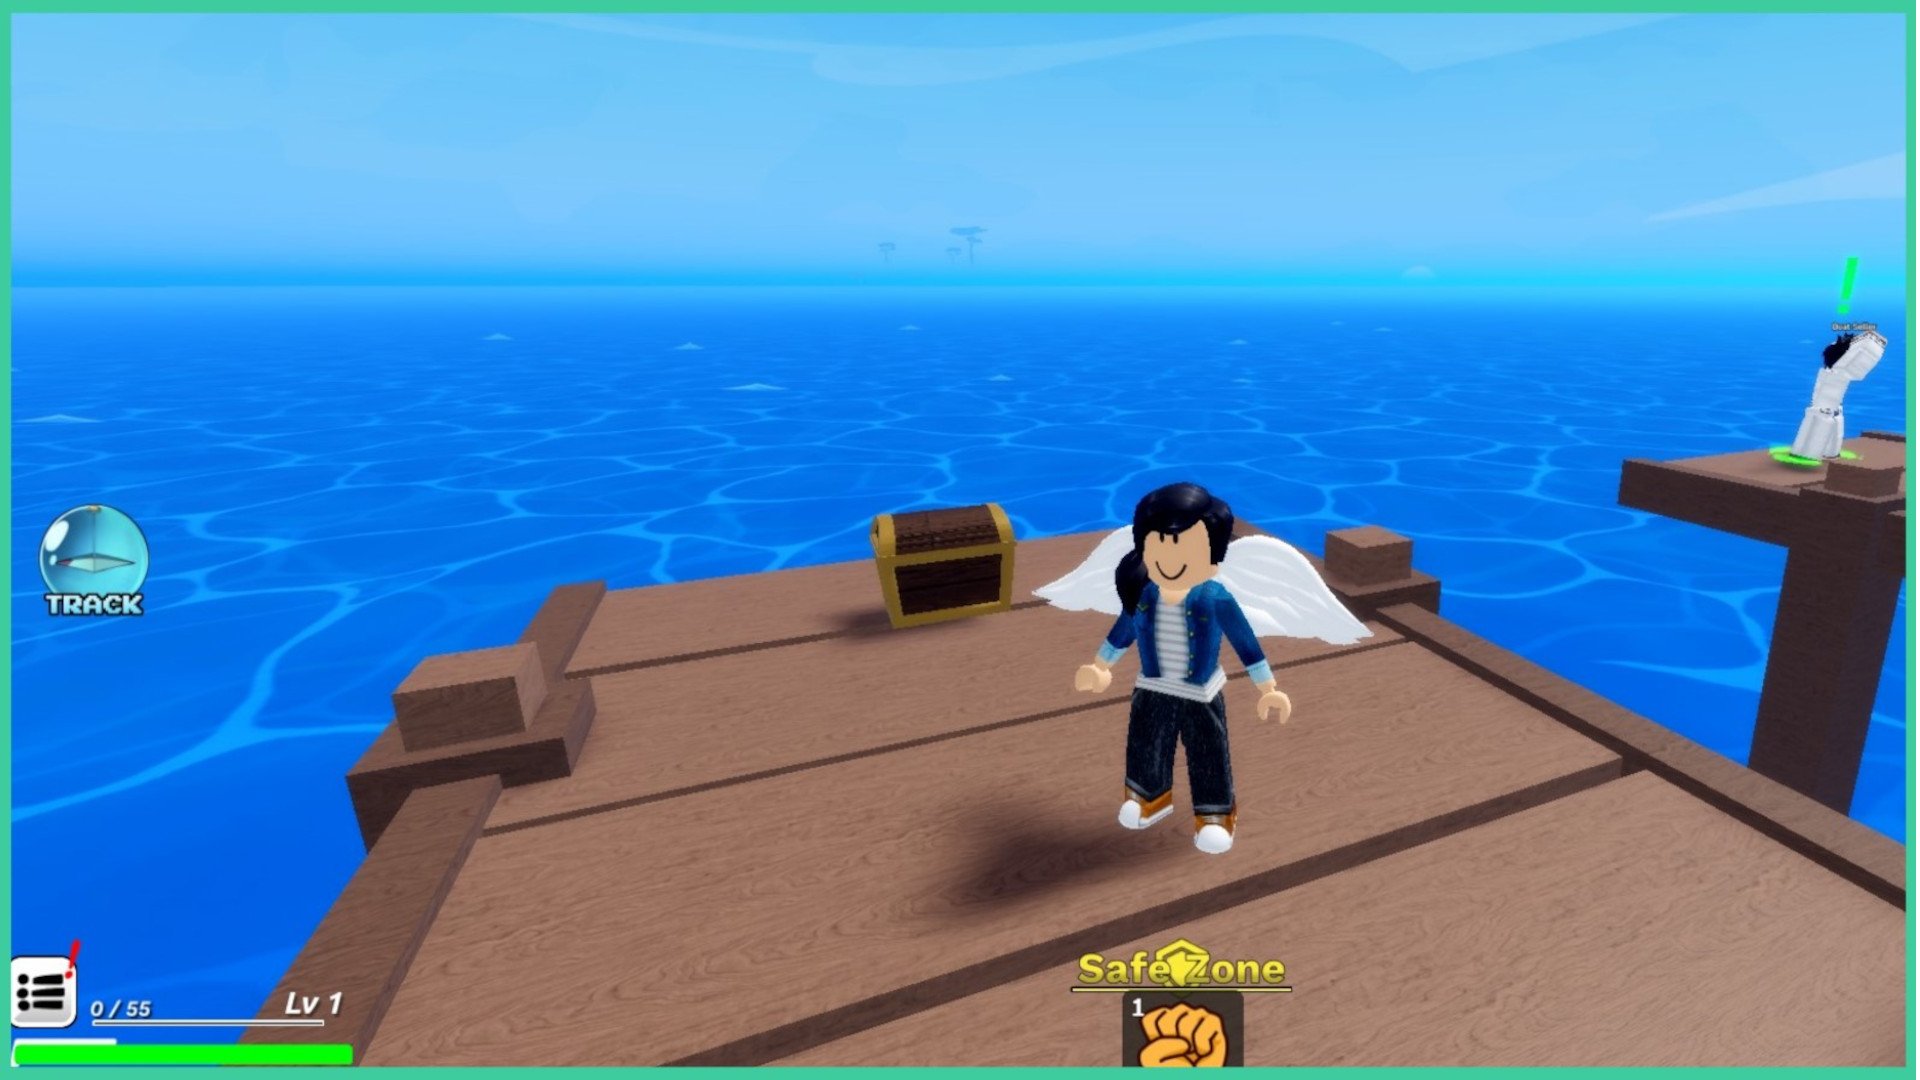 Feature image for our Demon Piece Weapons post. Image shows a Roblox character with wings standing on a pier, with the ocean in the background.